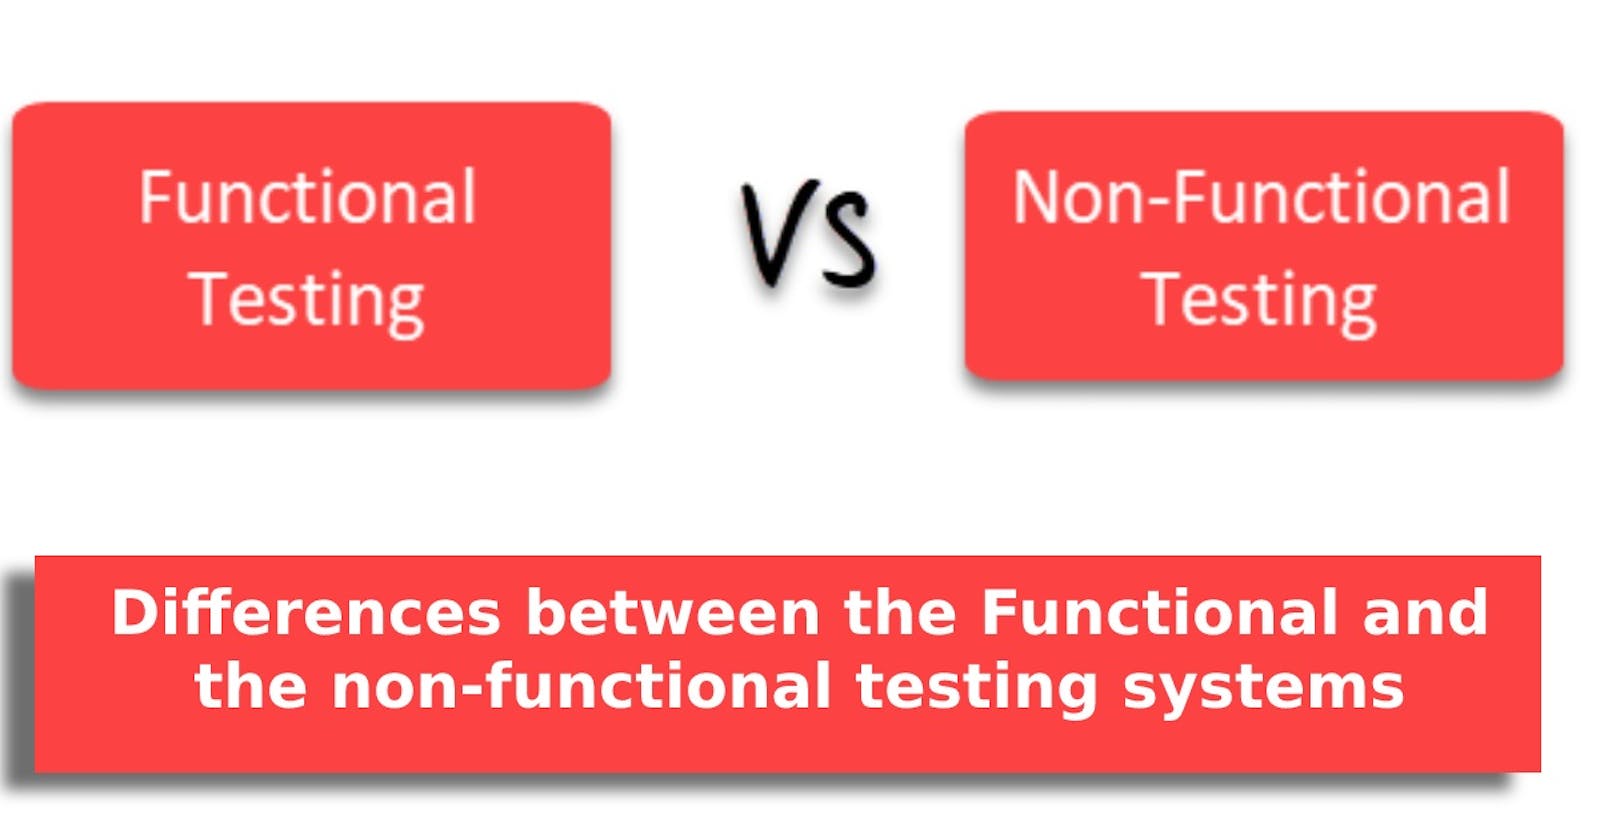 What are the most important differences between the functional and the non-functional testing systems?